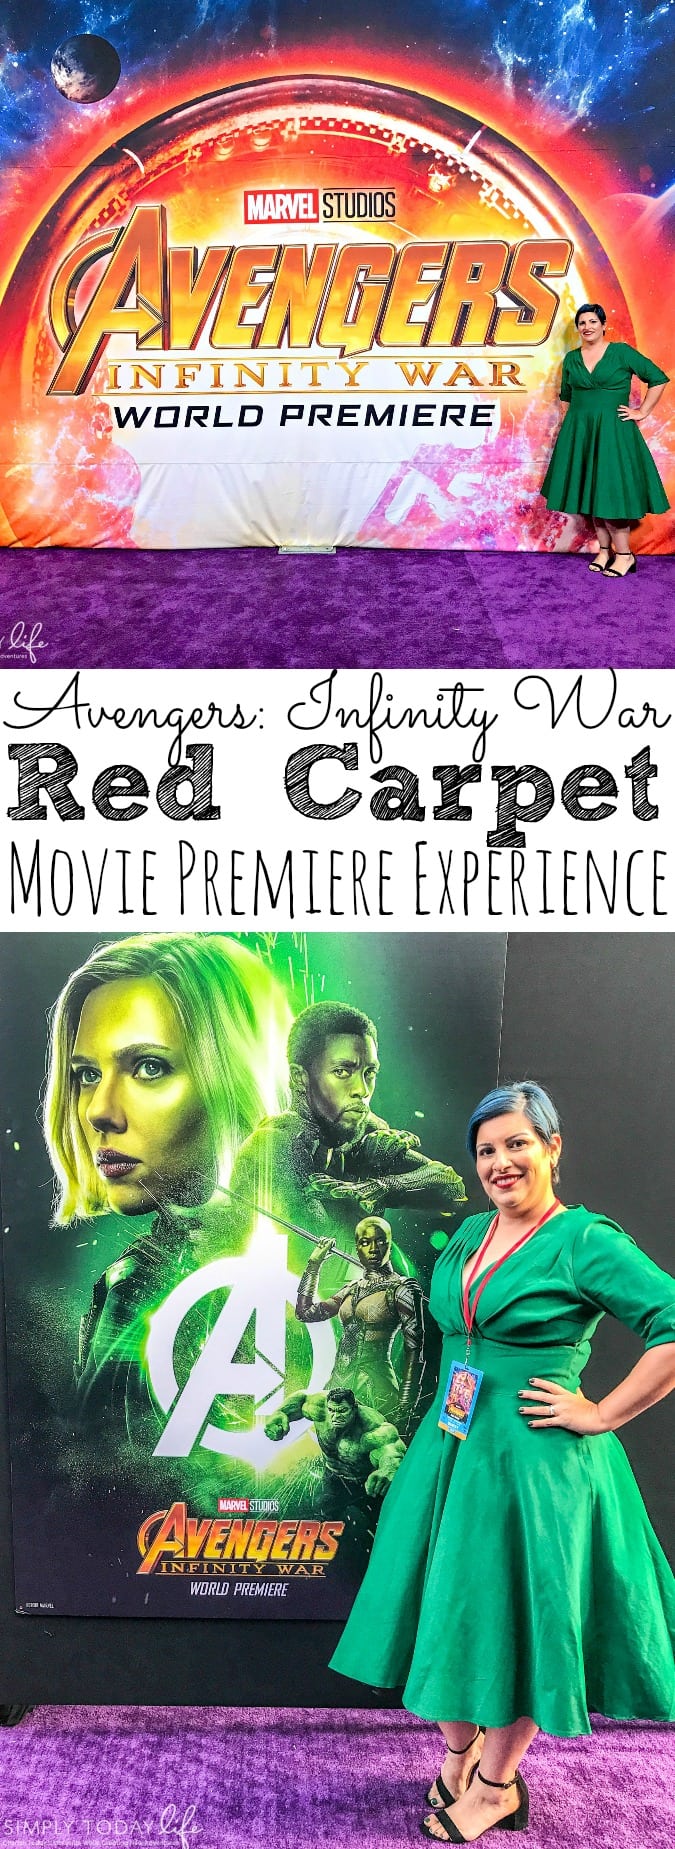 Avengers Infinity War Red Carpet Experience